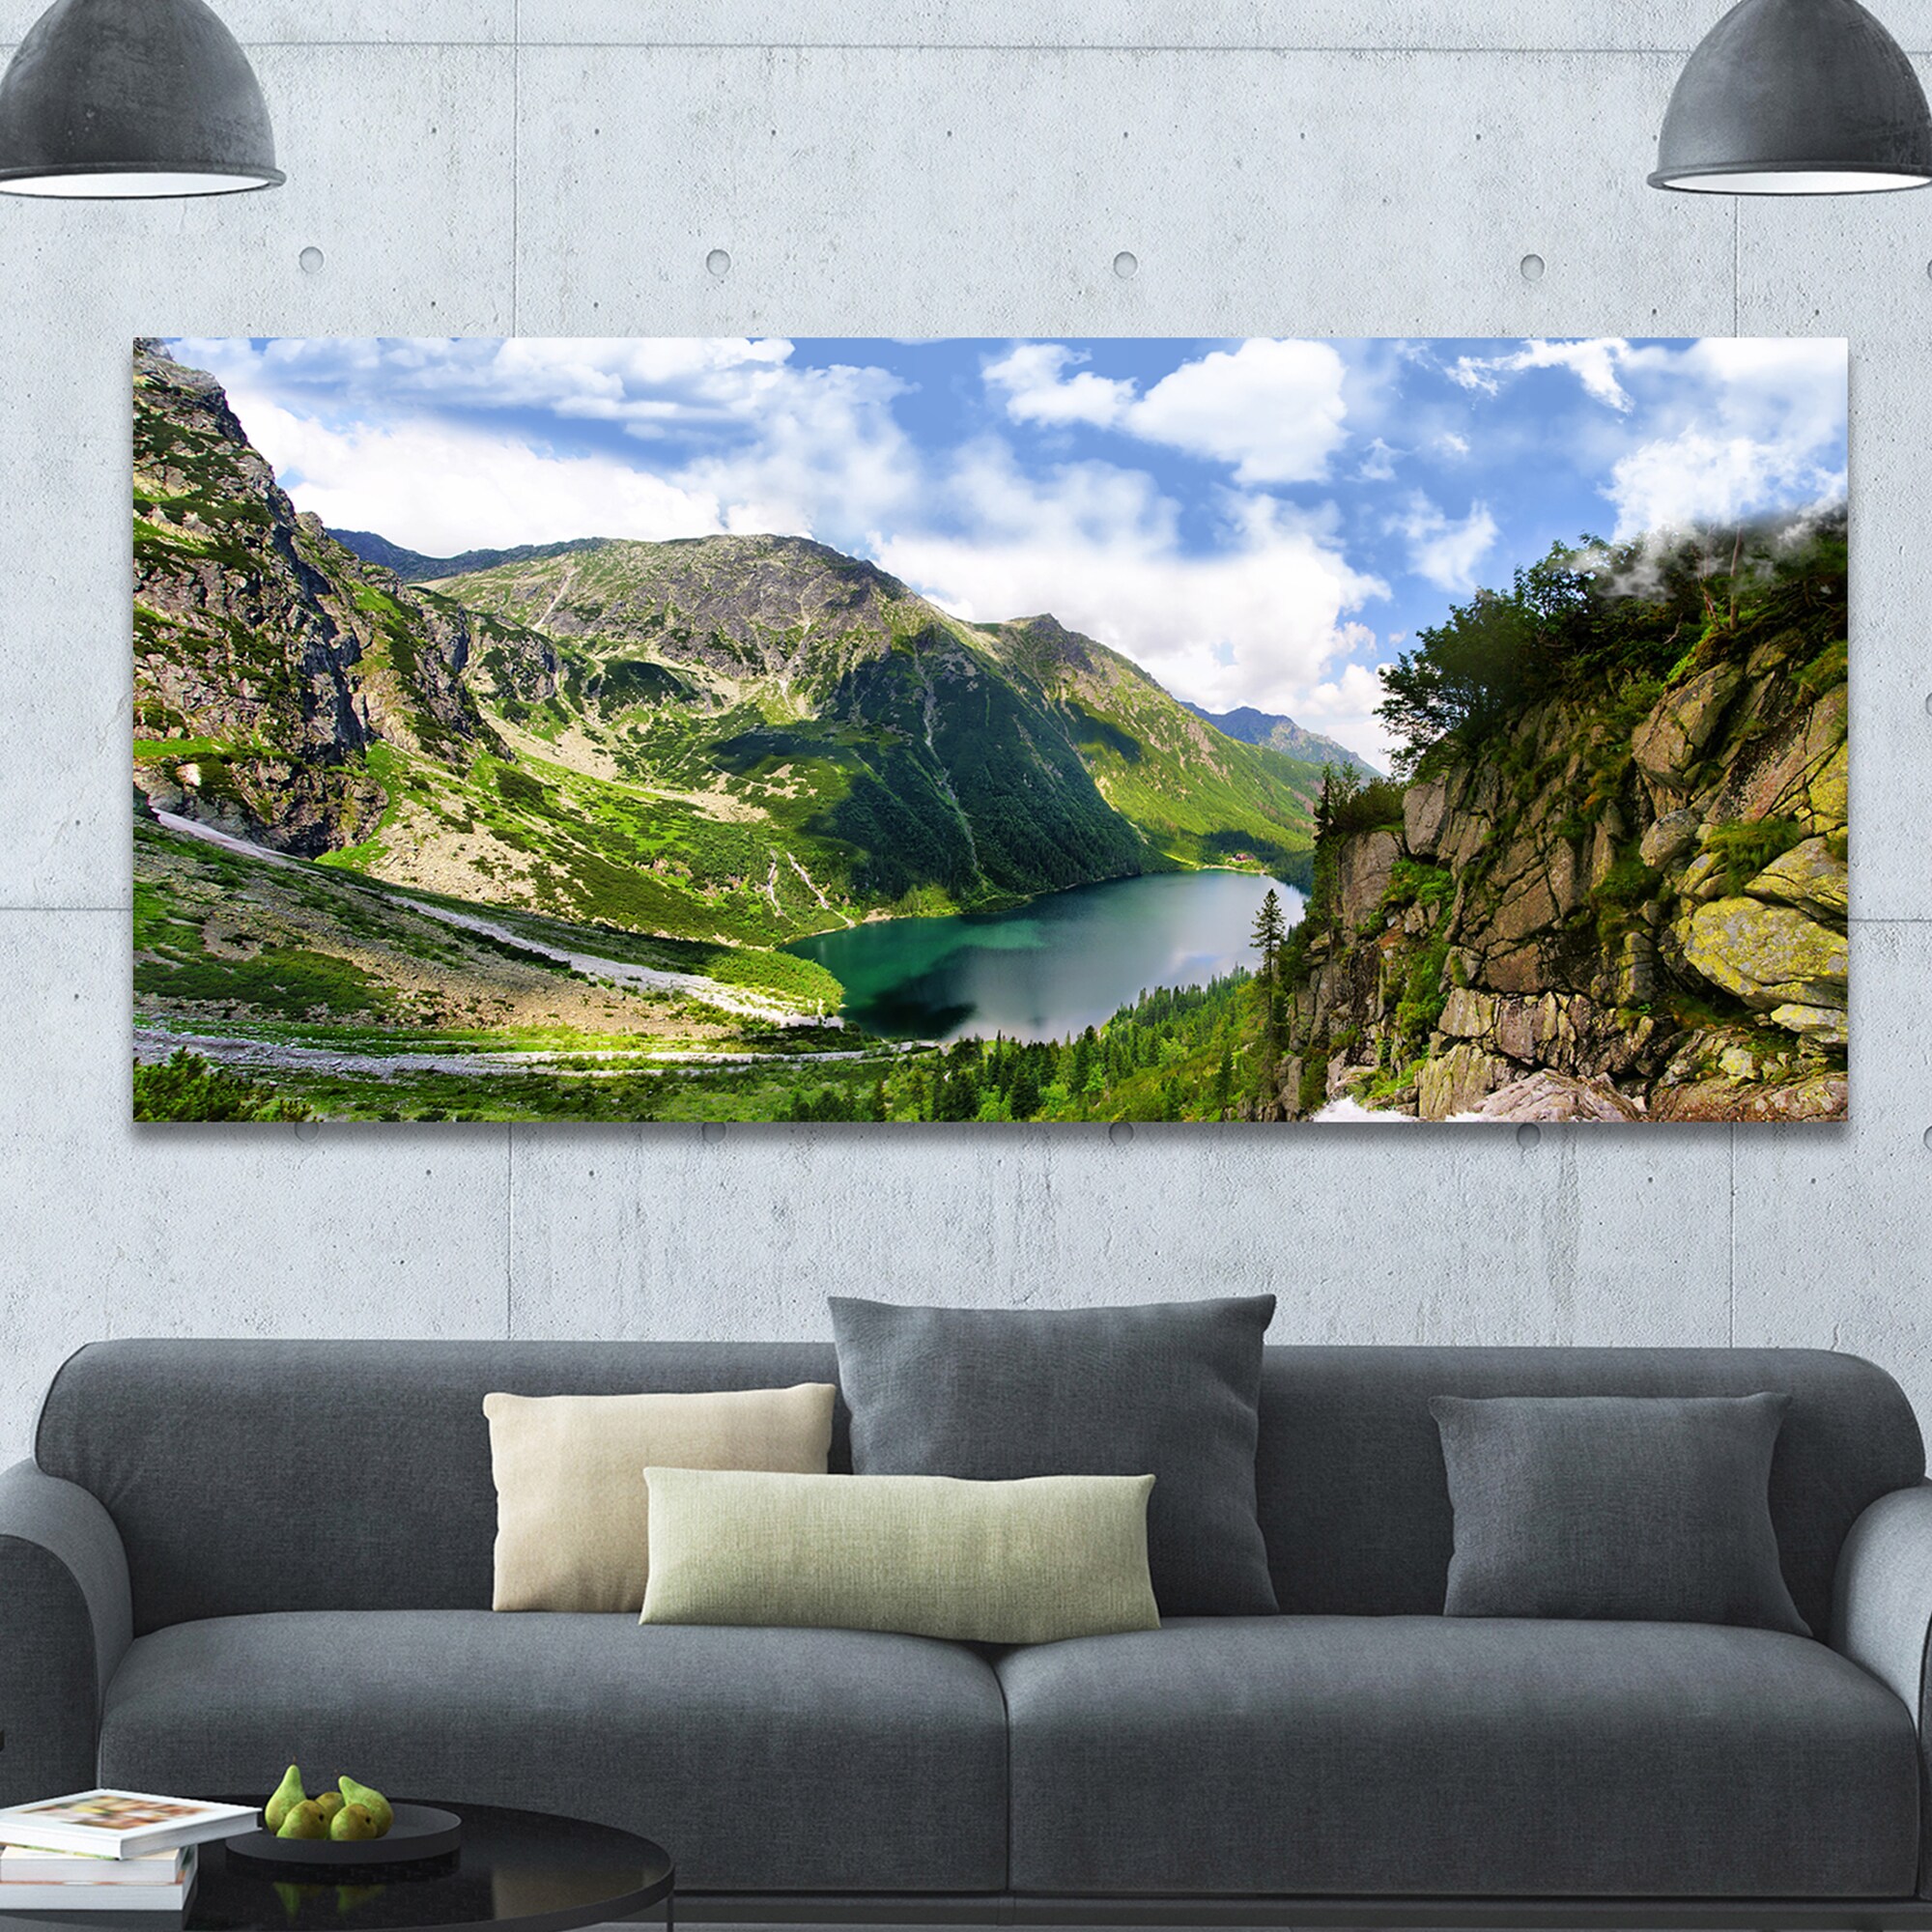 Shop Designart Incredible View Of Tatra Mountains Landscape Wall Artwork Multi Color Overstock 14544420